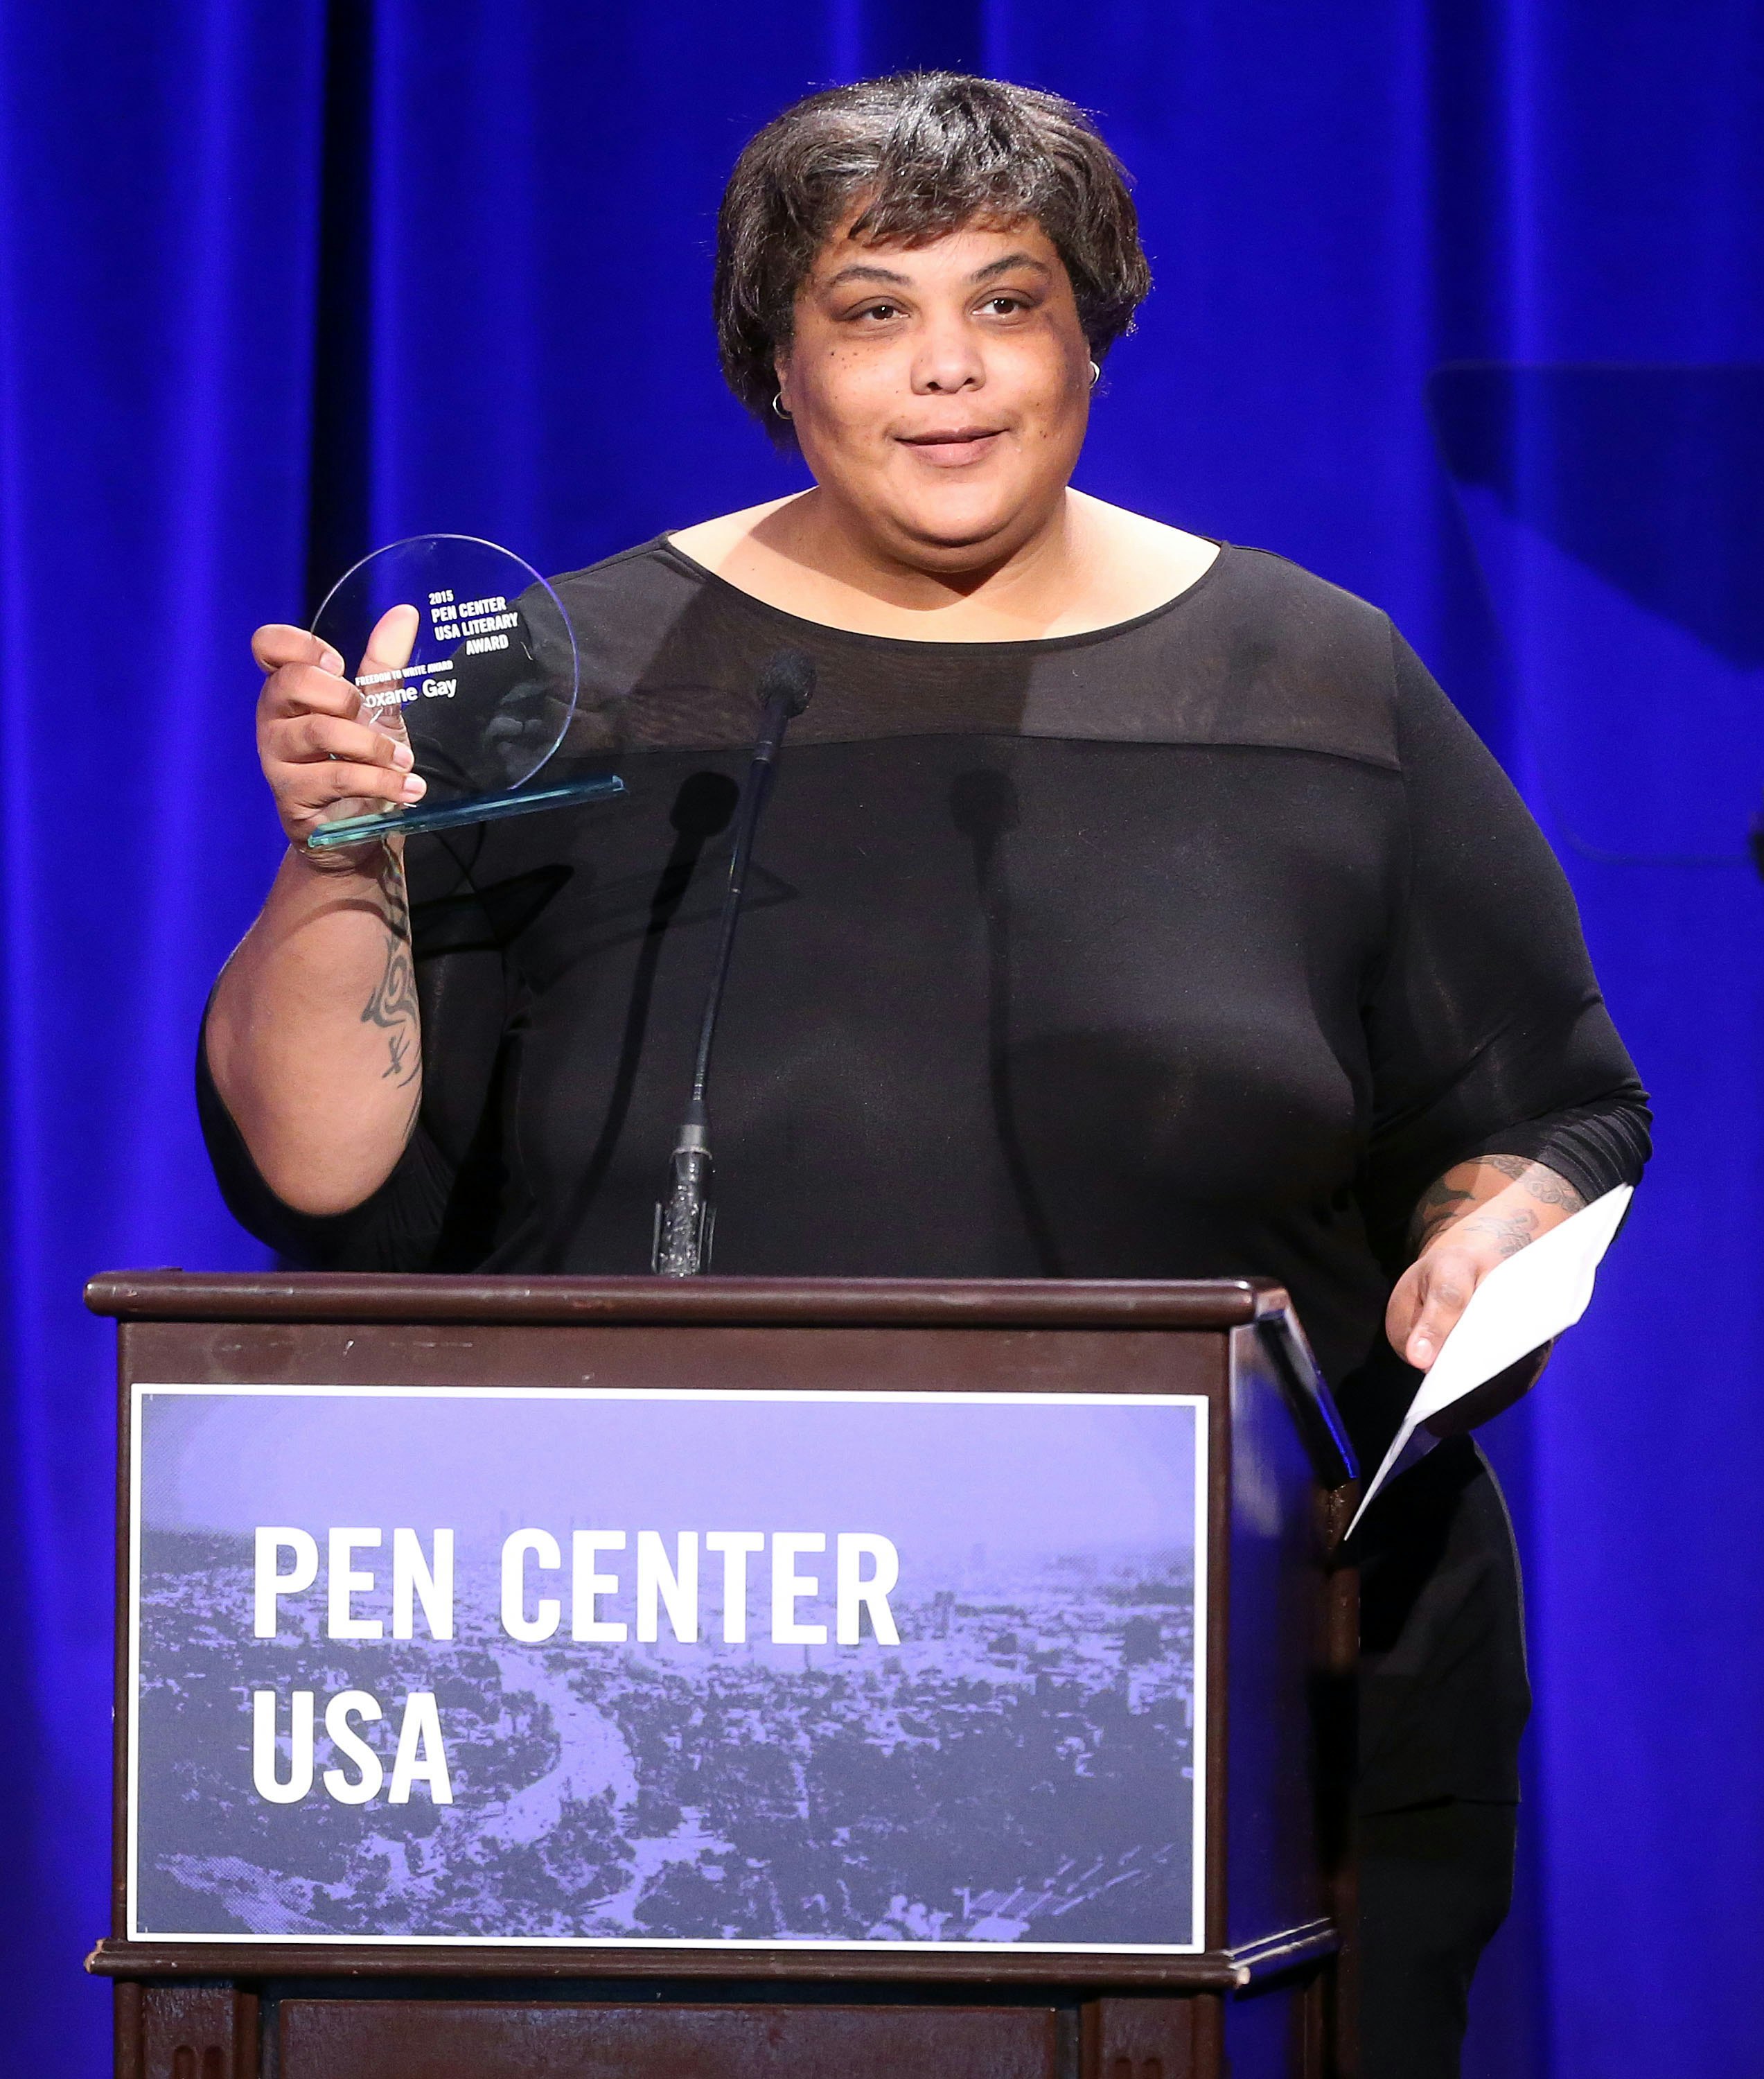 hunger by roxane gay publisher